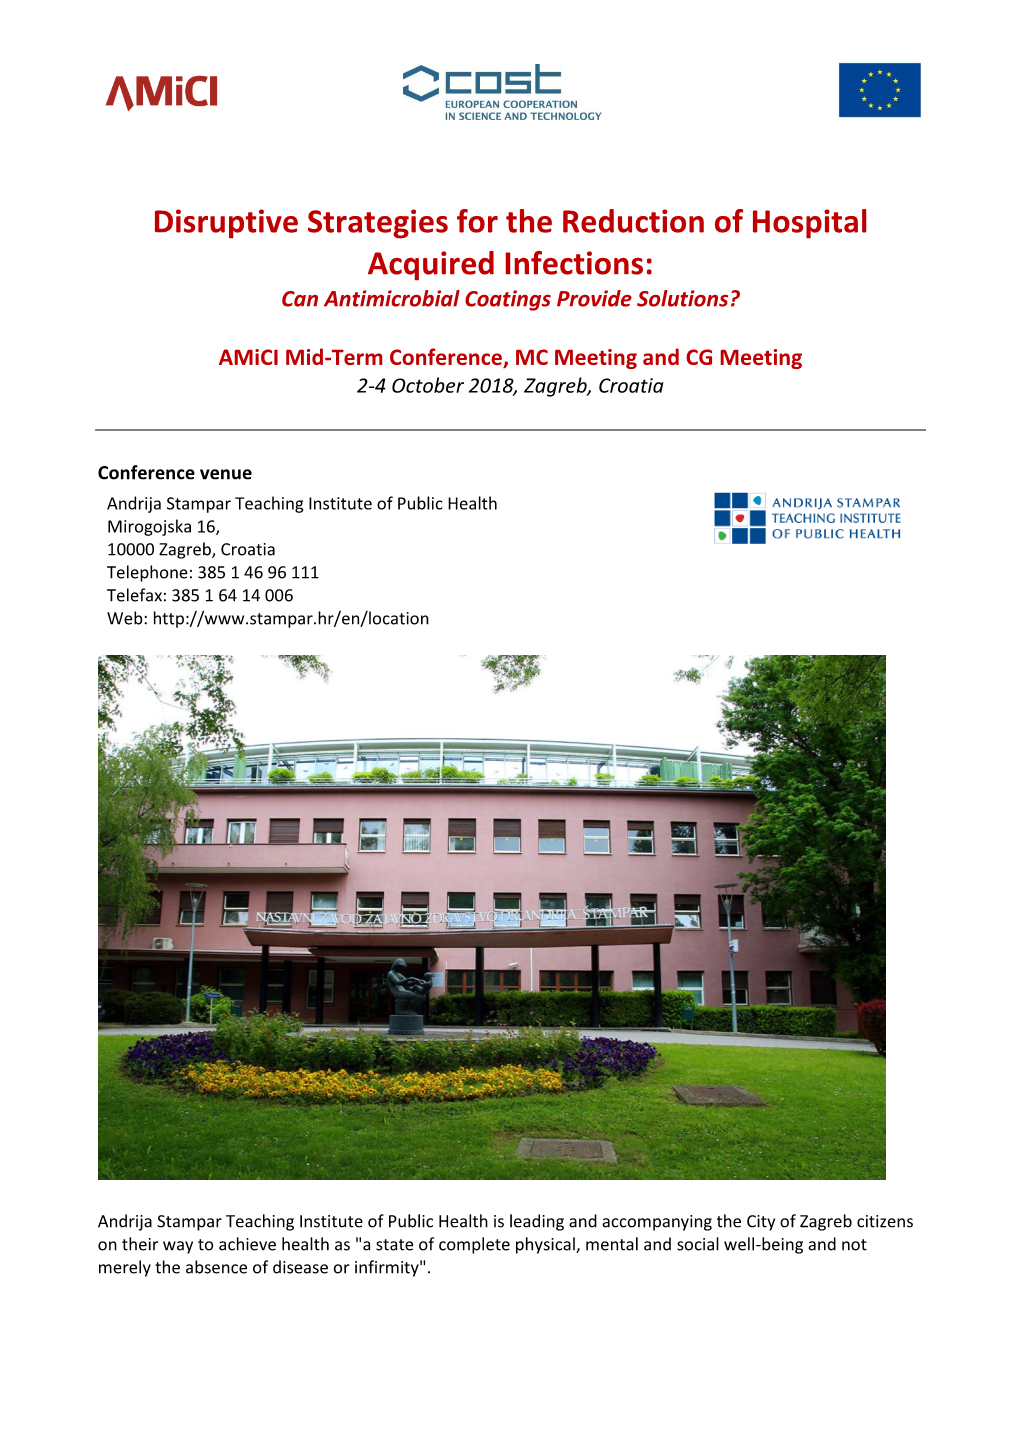 Disruptive Strategies for the Reduction of Hospital Acquired Infections: Can Antimicrobial Coatings Provide Solutions?